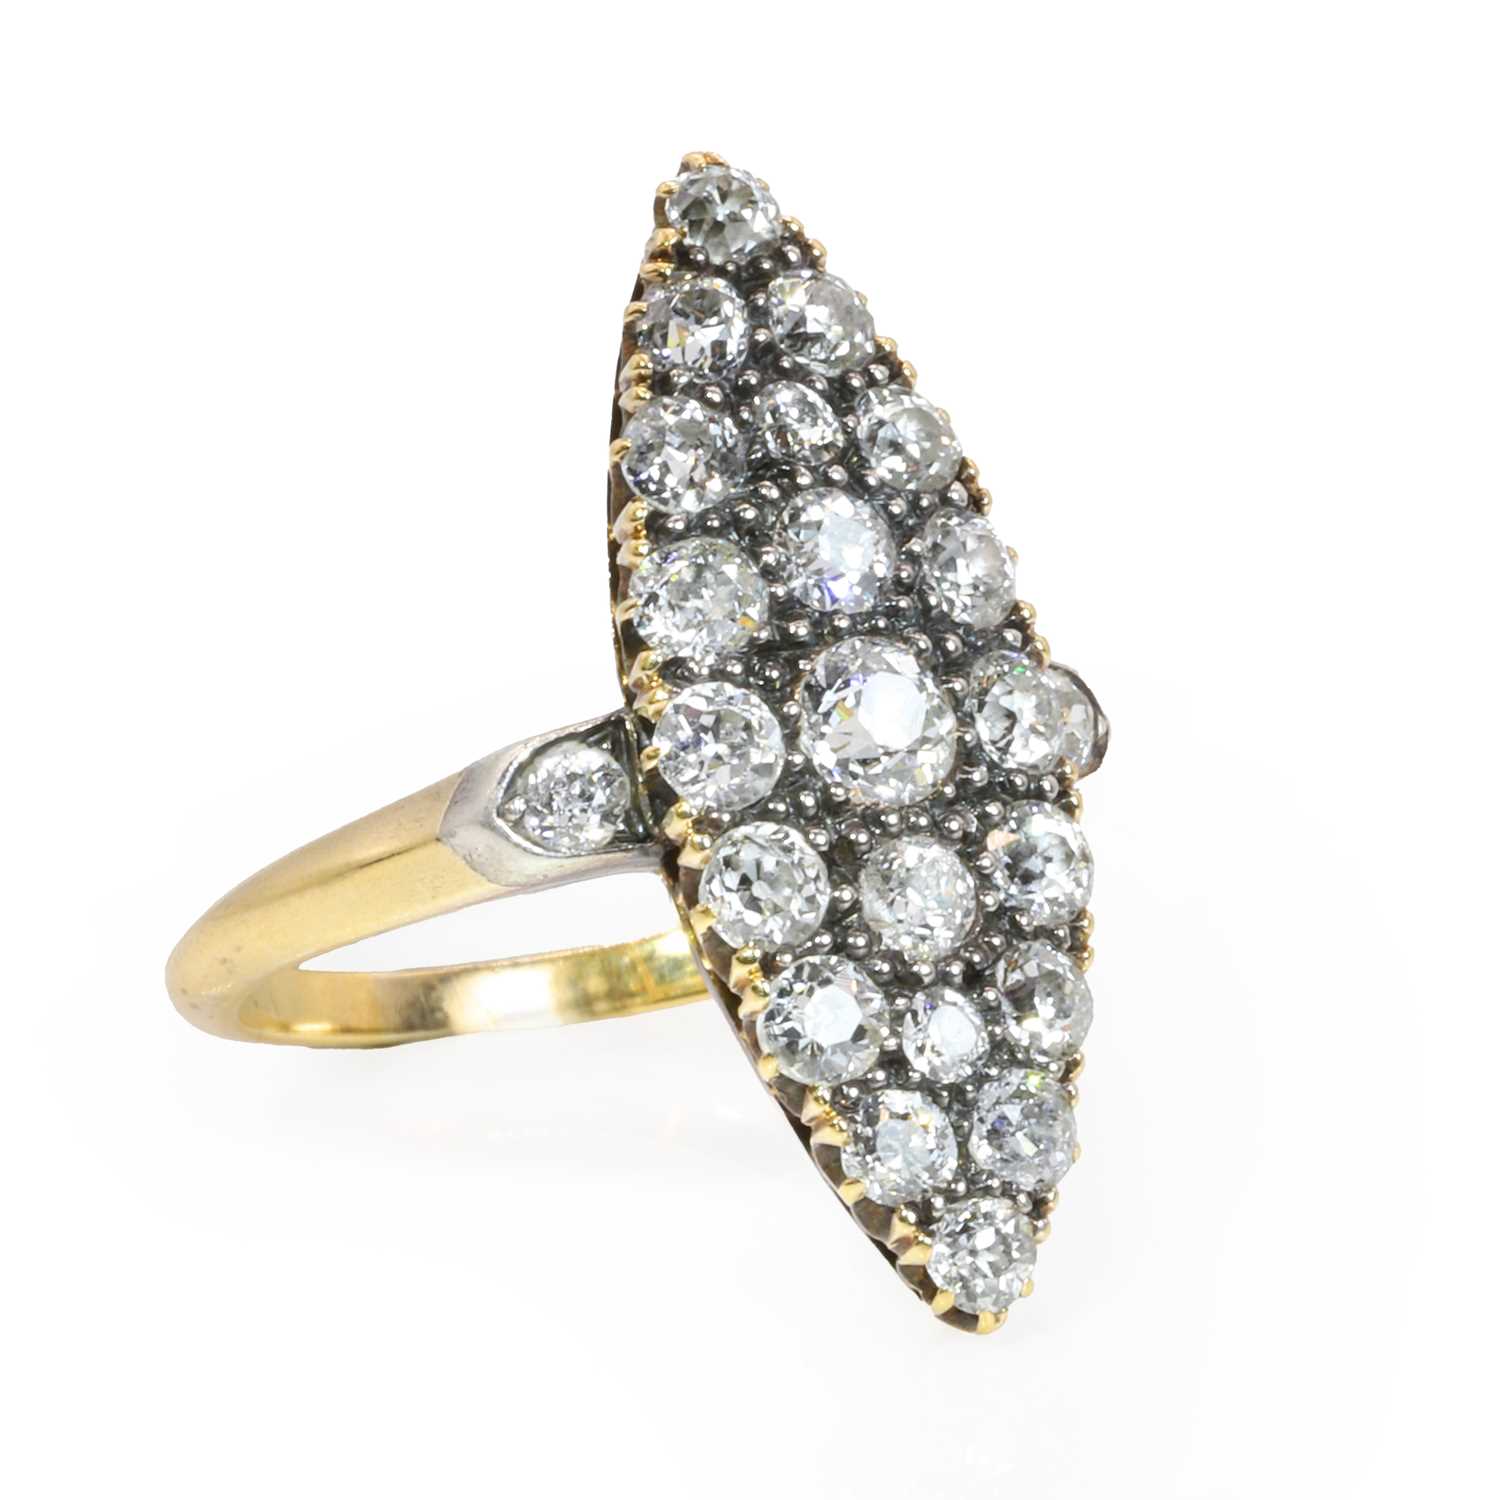 An Edwardian diamond marquise form ring,